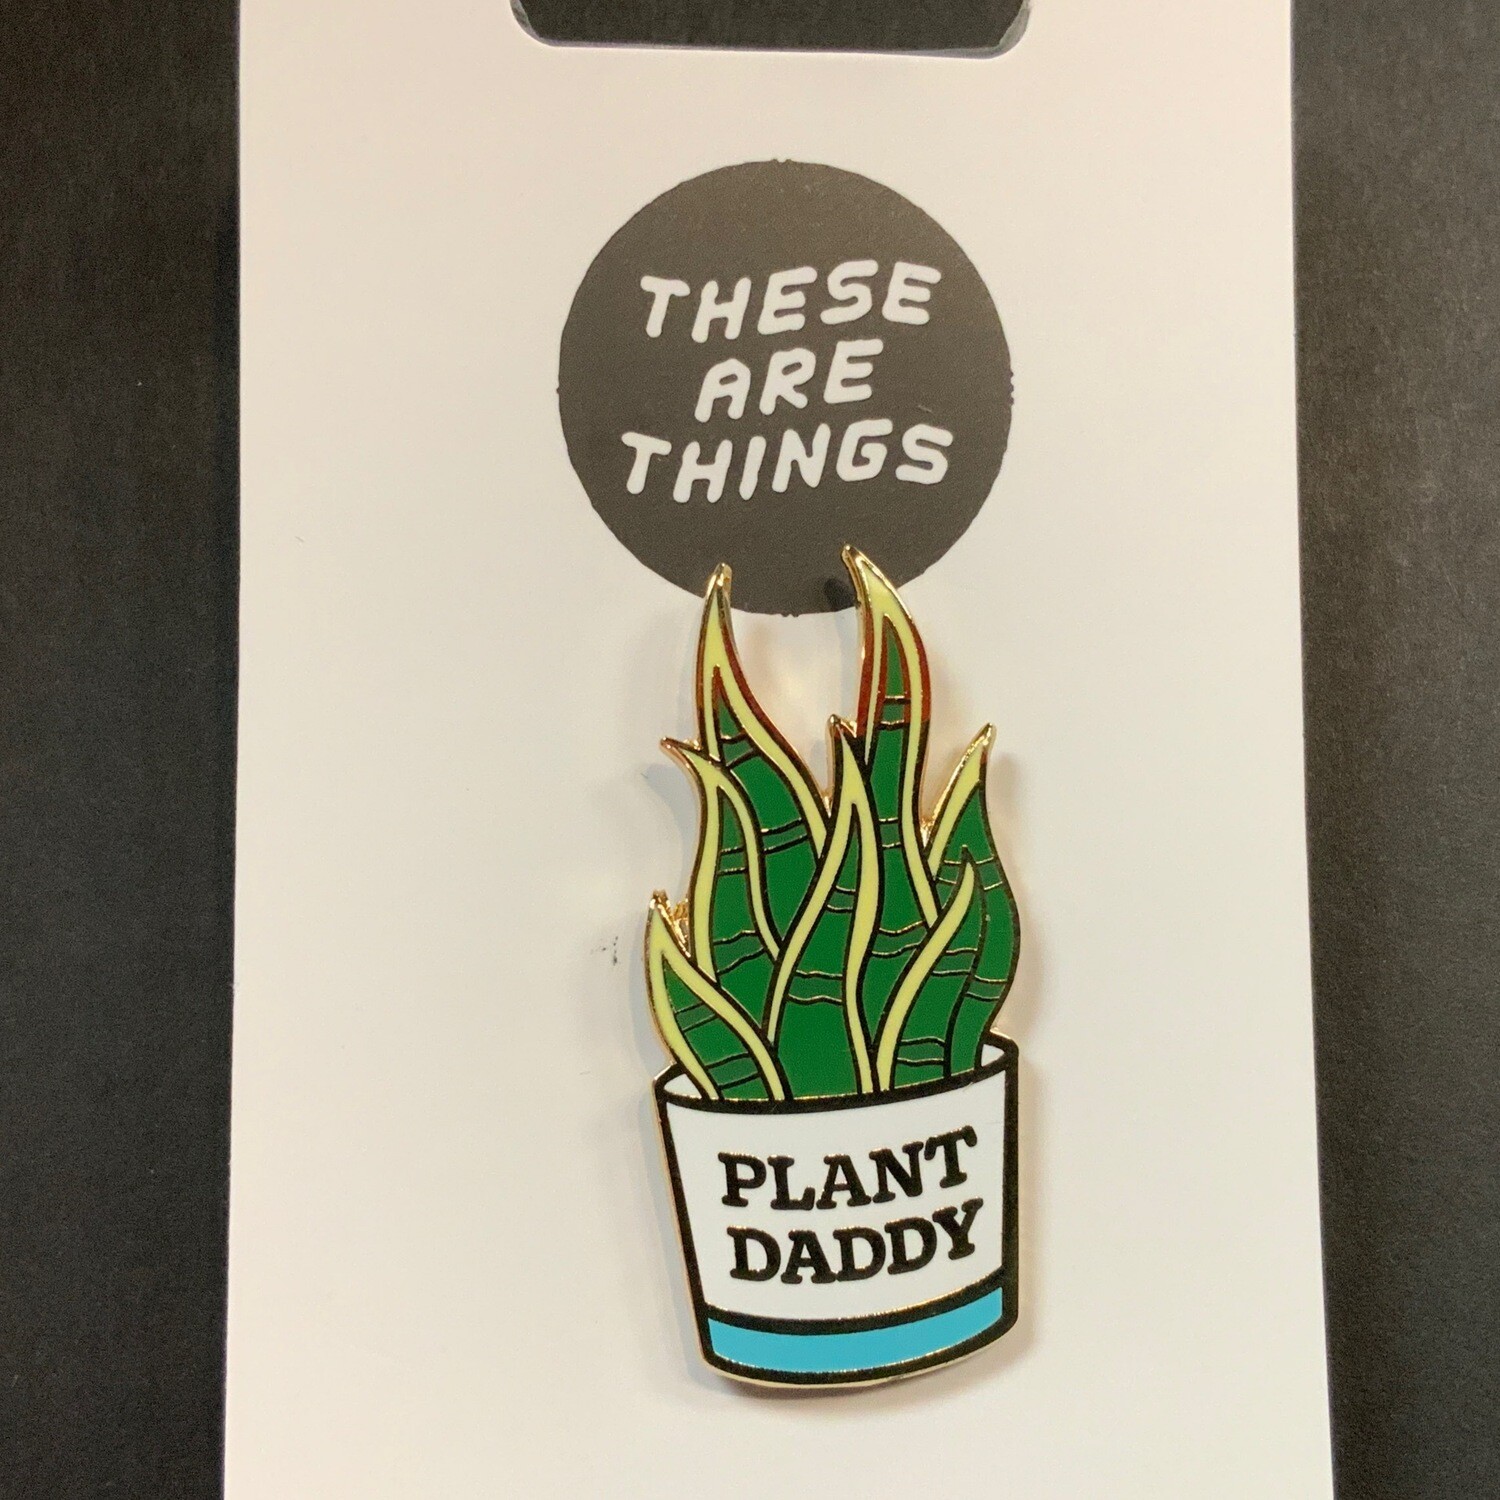 Plant Daddy - Enamel Pin from These Are Things